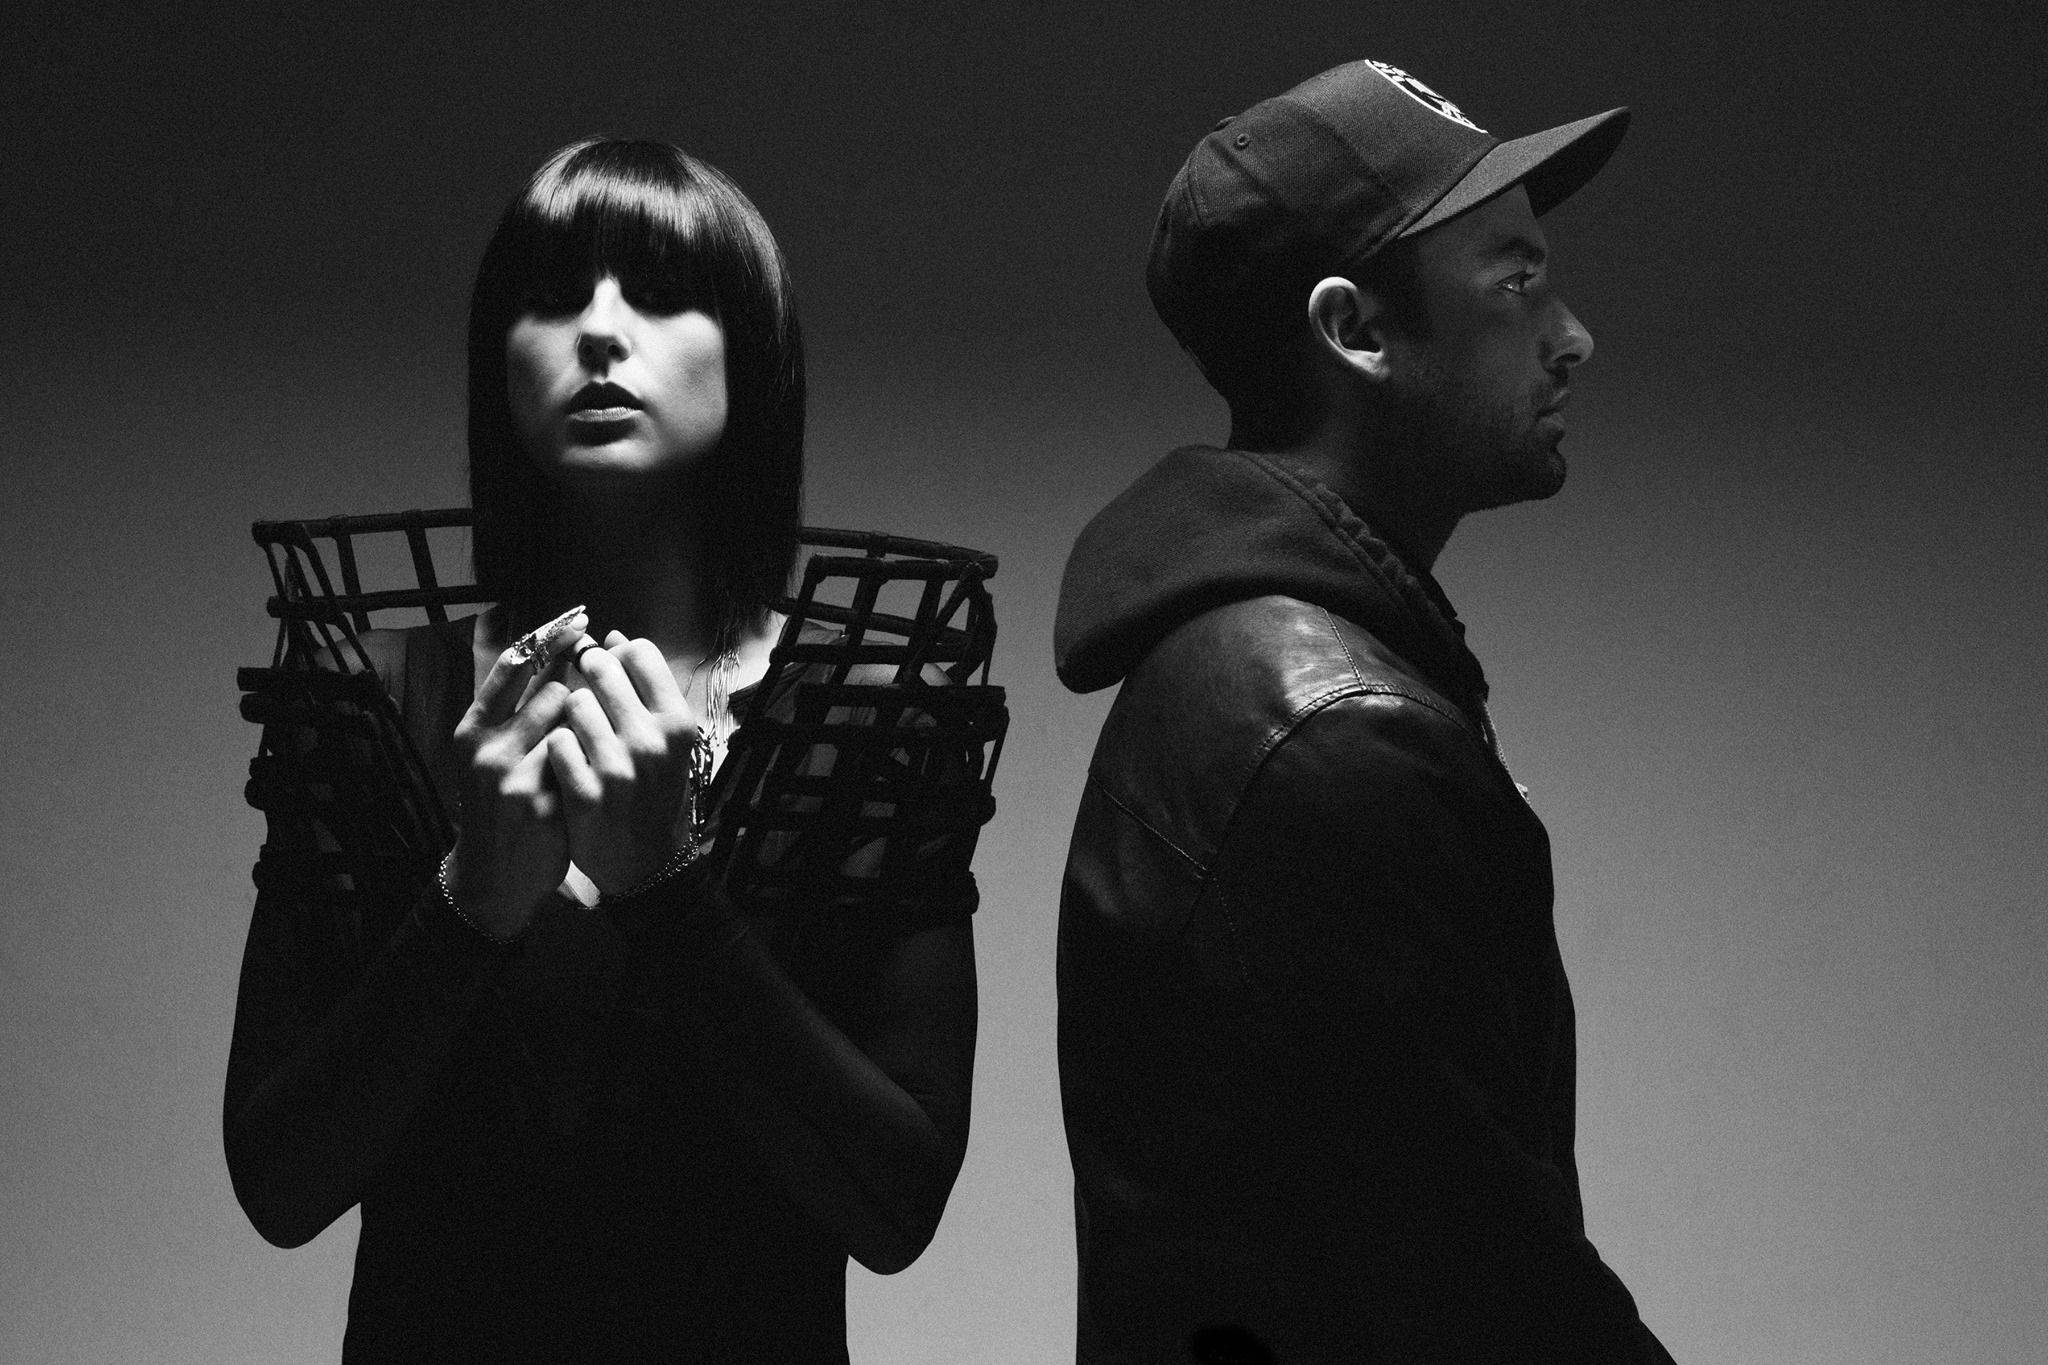 Stand up with Phantogram